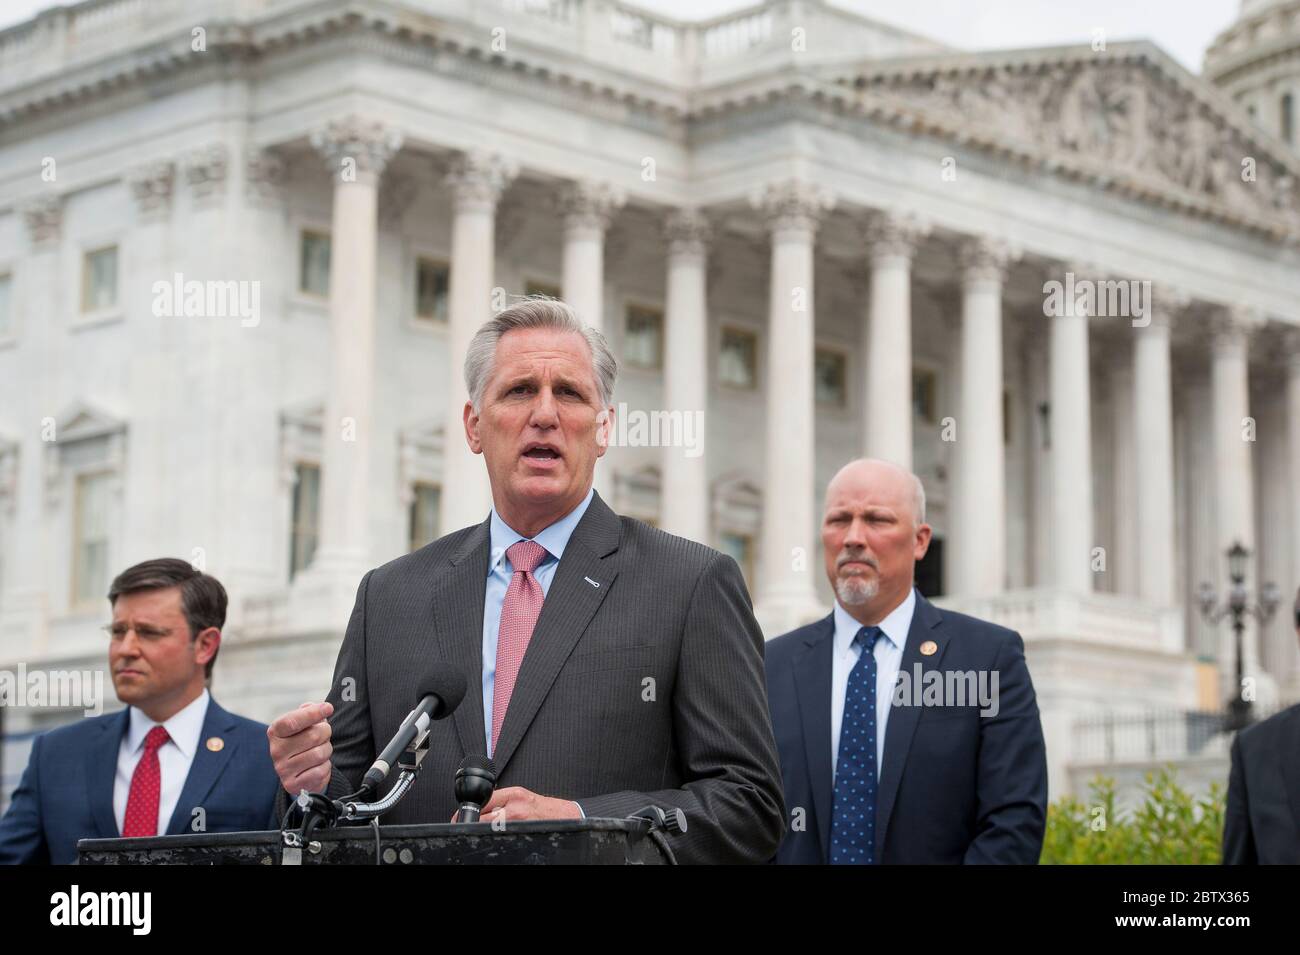 House Minority Leader Rep. Kevin McCarthy (R-Calif.) holds a media availability with House Minority Whip Rep. Steve Scalise (R-LA), House GOP Conference Chairwoman Liz Cheney (R-WY) and others, to announce that Republican leaders have filed a lawsuit against House Speaker Nancy Pelosi and congressional officials in an effort to block the House of Representatives from using a proxy voting system to allow for remote voting during the coronavirus pandemic, outside of the U.S. Capitol in Washington, DC., Wednesday, May 27, 2020. Credit: Rod Lamkey/CNP | usage worldwide Stock Photo